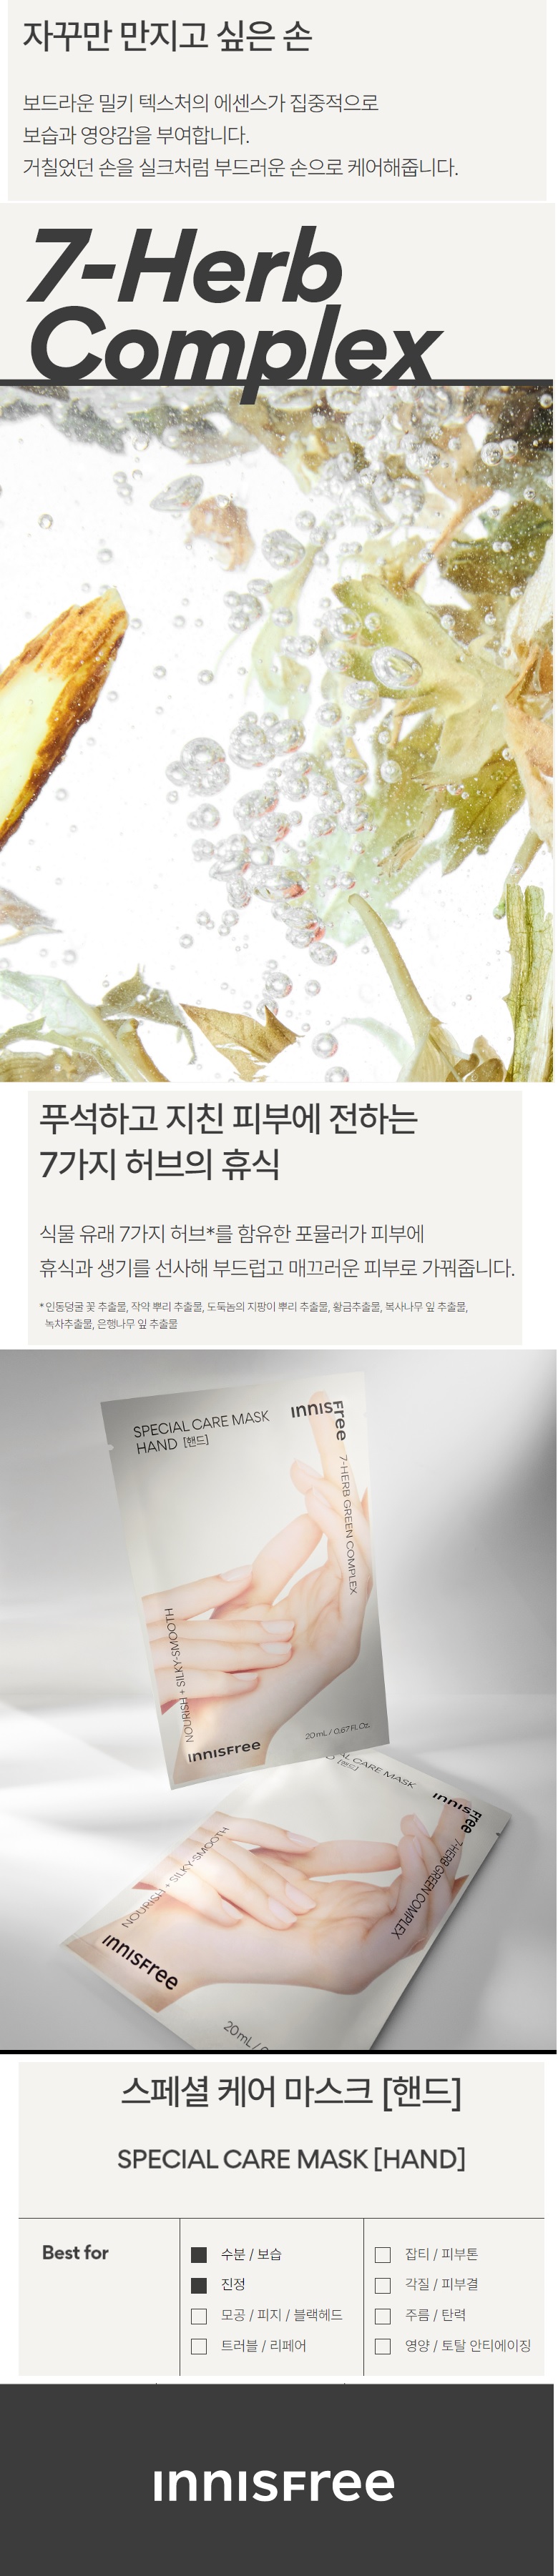 Innisfree Special Care Hand Mask Sheet korean skincare product online shop malaysia china poland2